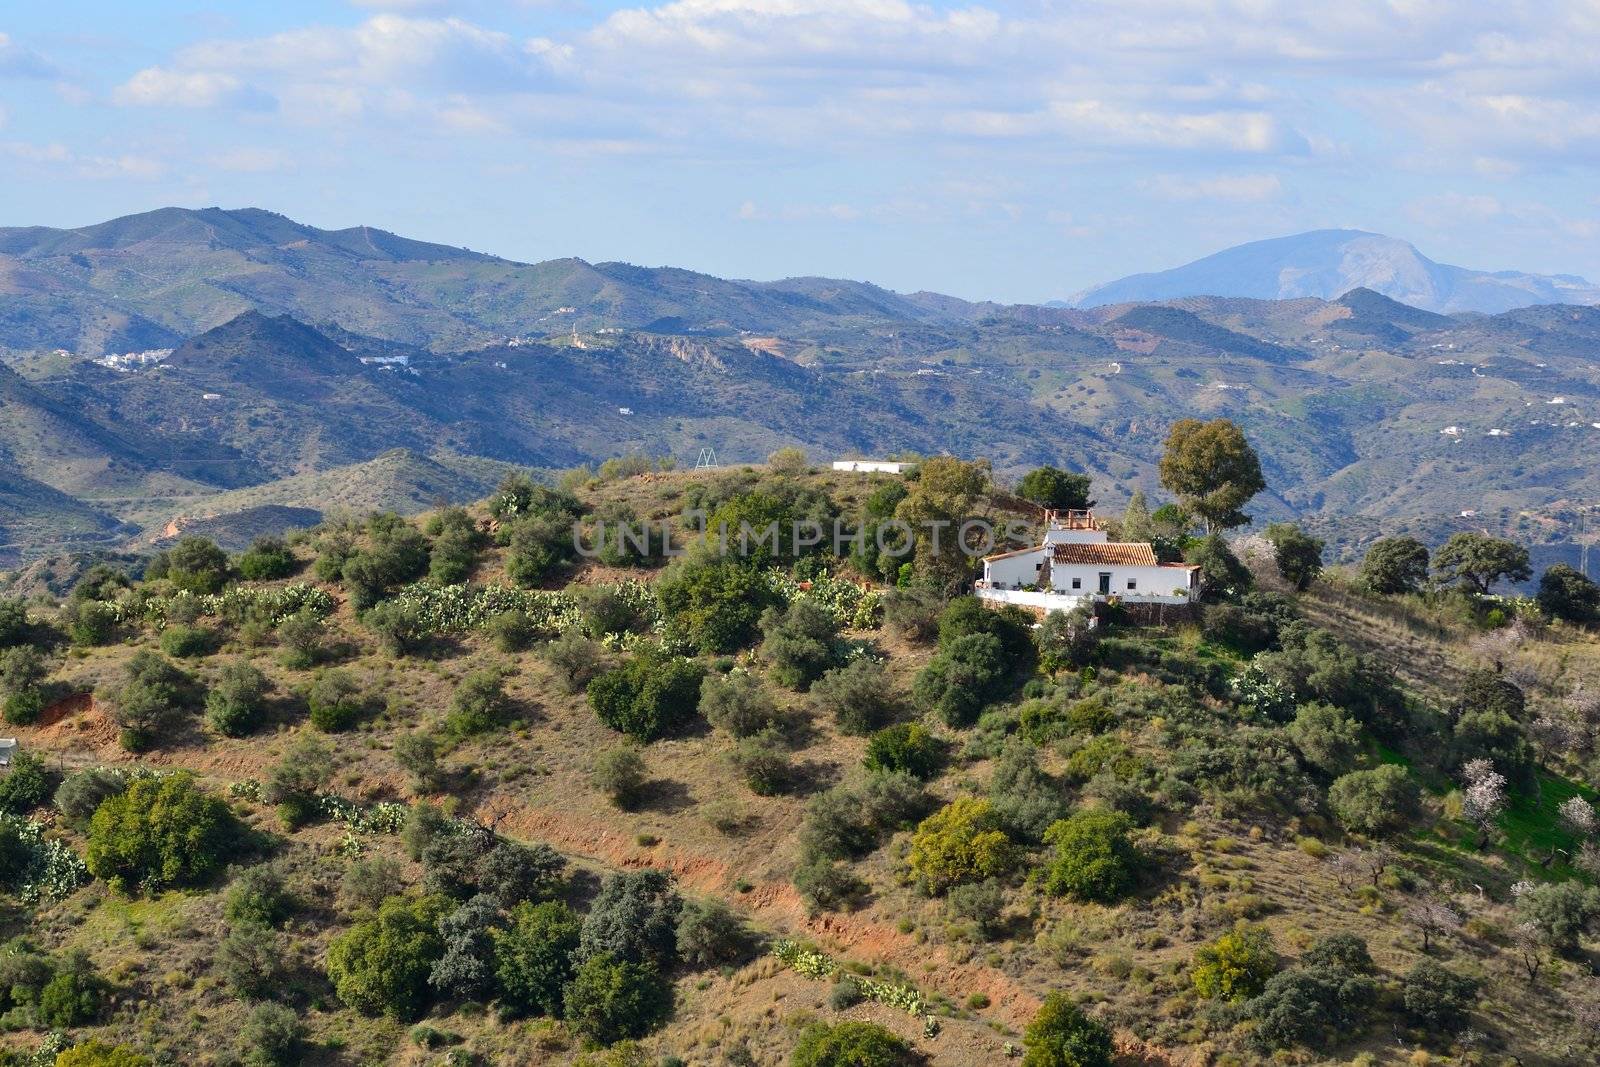 northern slopes of the mountains of Malaga, Malaga road picture-antequera